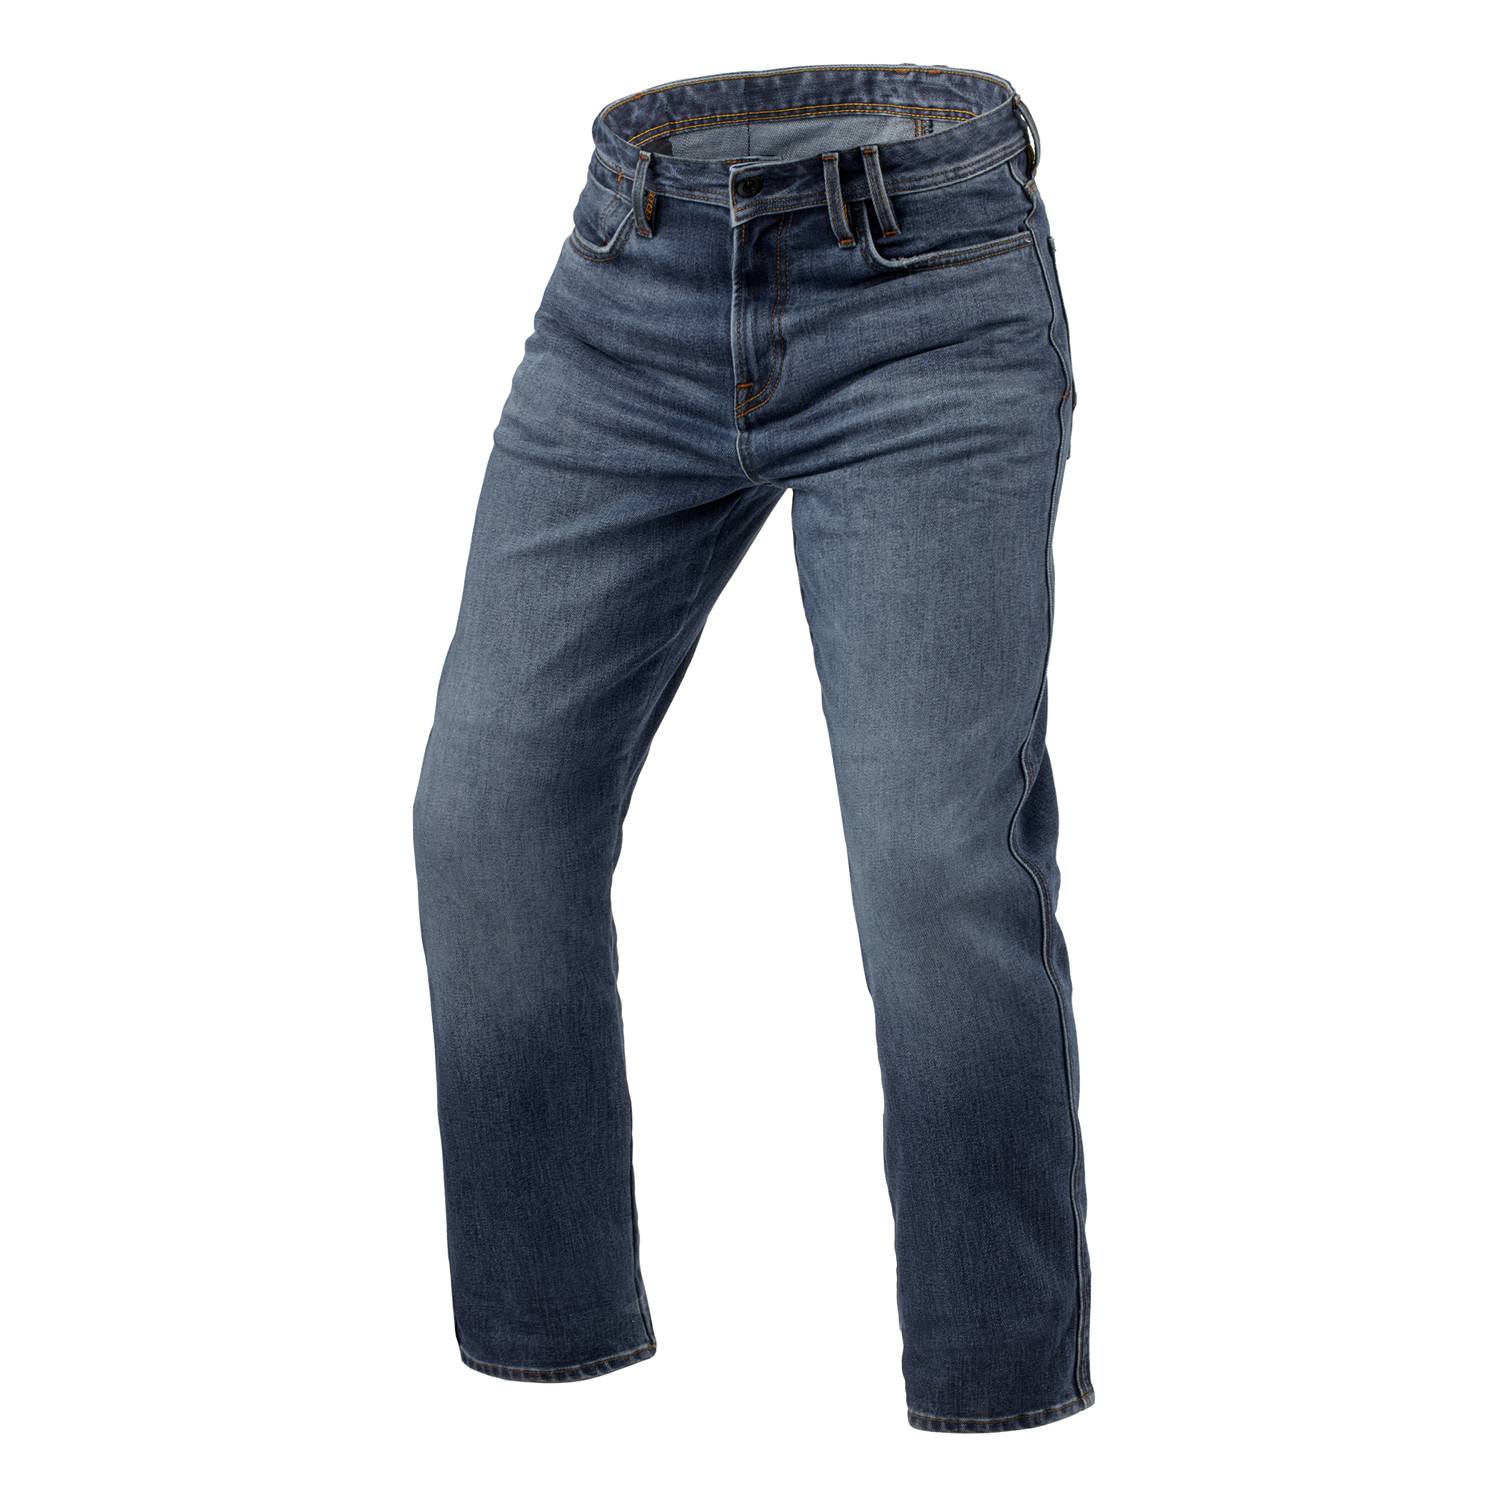 Image of REV'IT! Jeans Lombard 3 RF Medium Blue Stone L34 Motorcycle Jeans Taille L34/W28